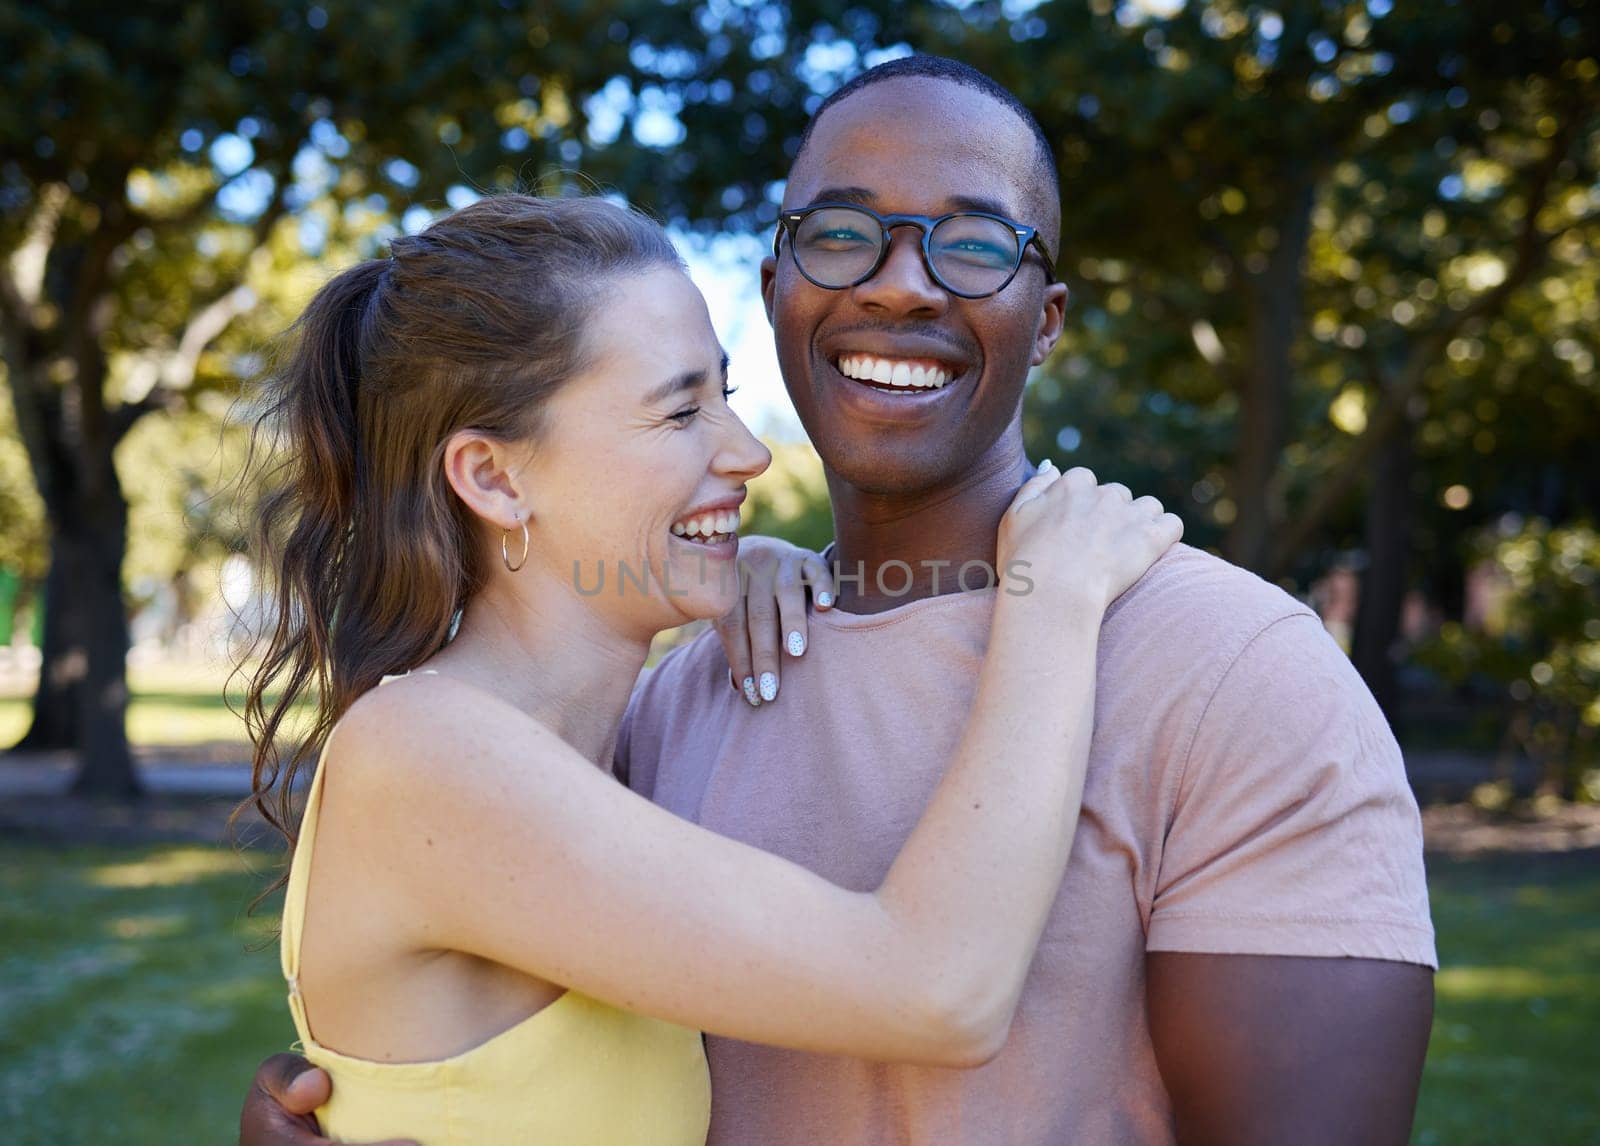 Summer, love and laugh with an interracial couple hugging outdoor together in a park or garden. Nature, diversity and romance with a man and woman bonding while on a date outside in the countryside.